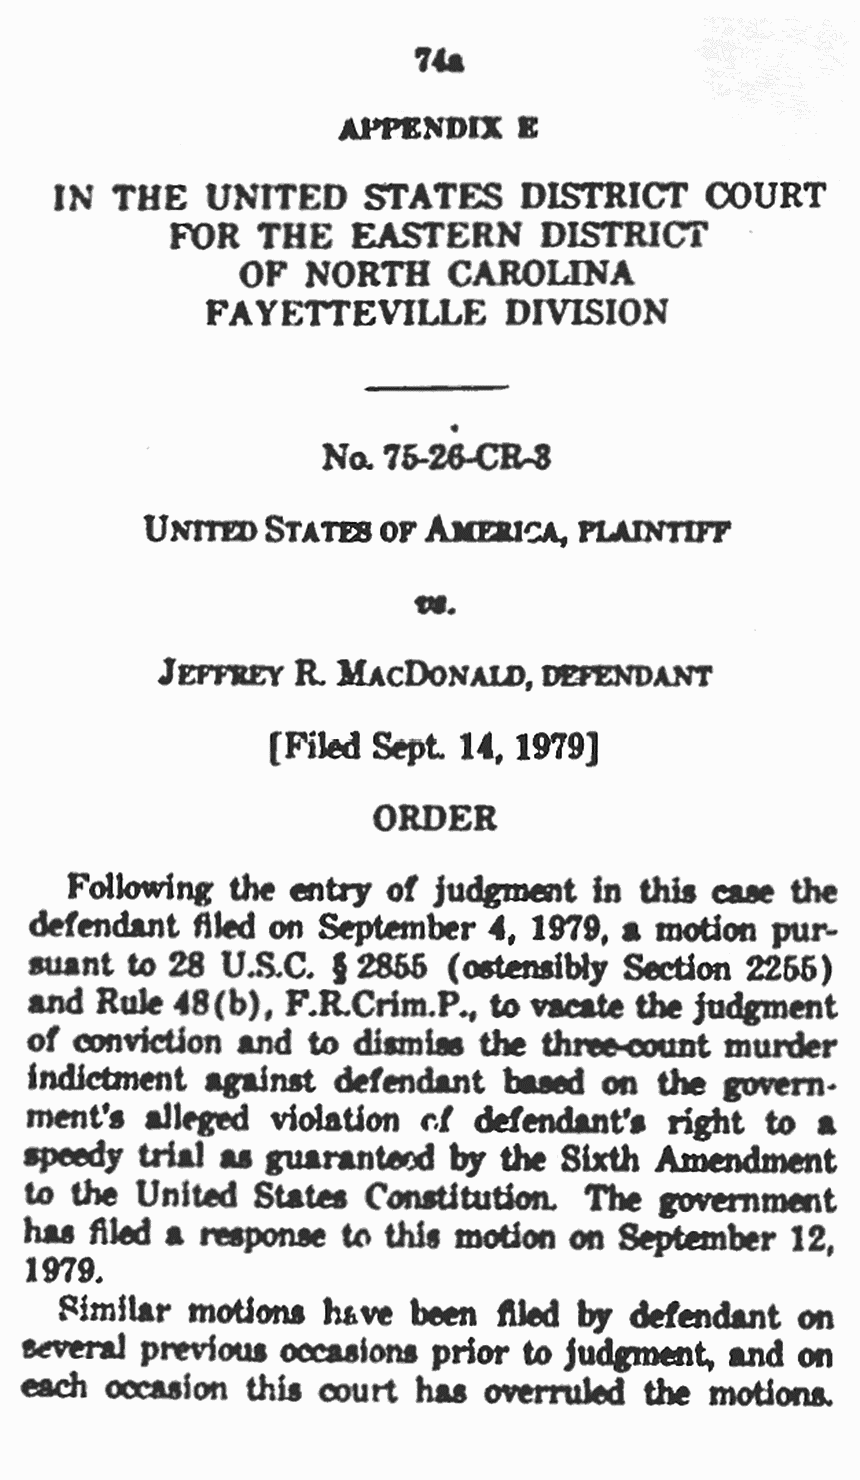 September 14, 1979: United States District Court, Eastern District of North Carolina; Order Denying Motion of Jeffrey MacDonald to Vacate Conviction and Dismiss Indictment, p. 1 of 2